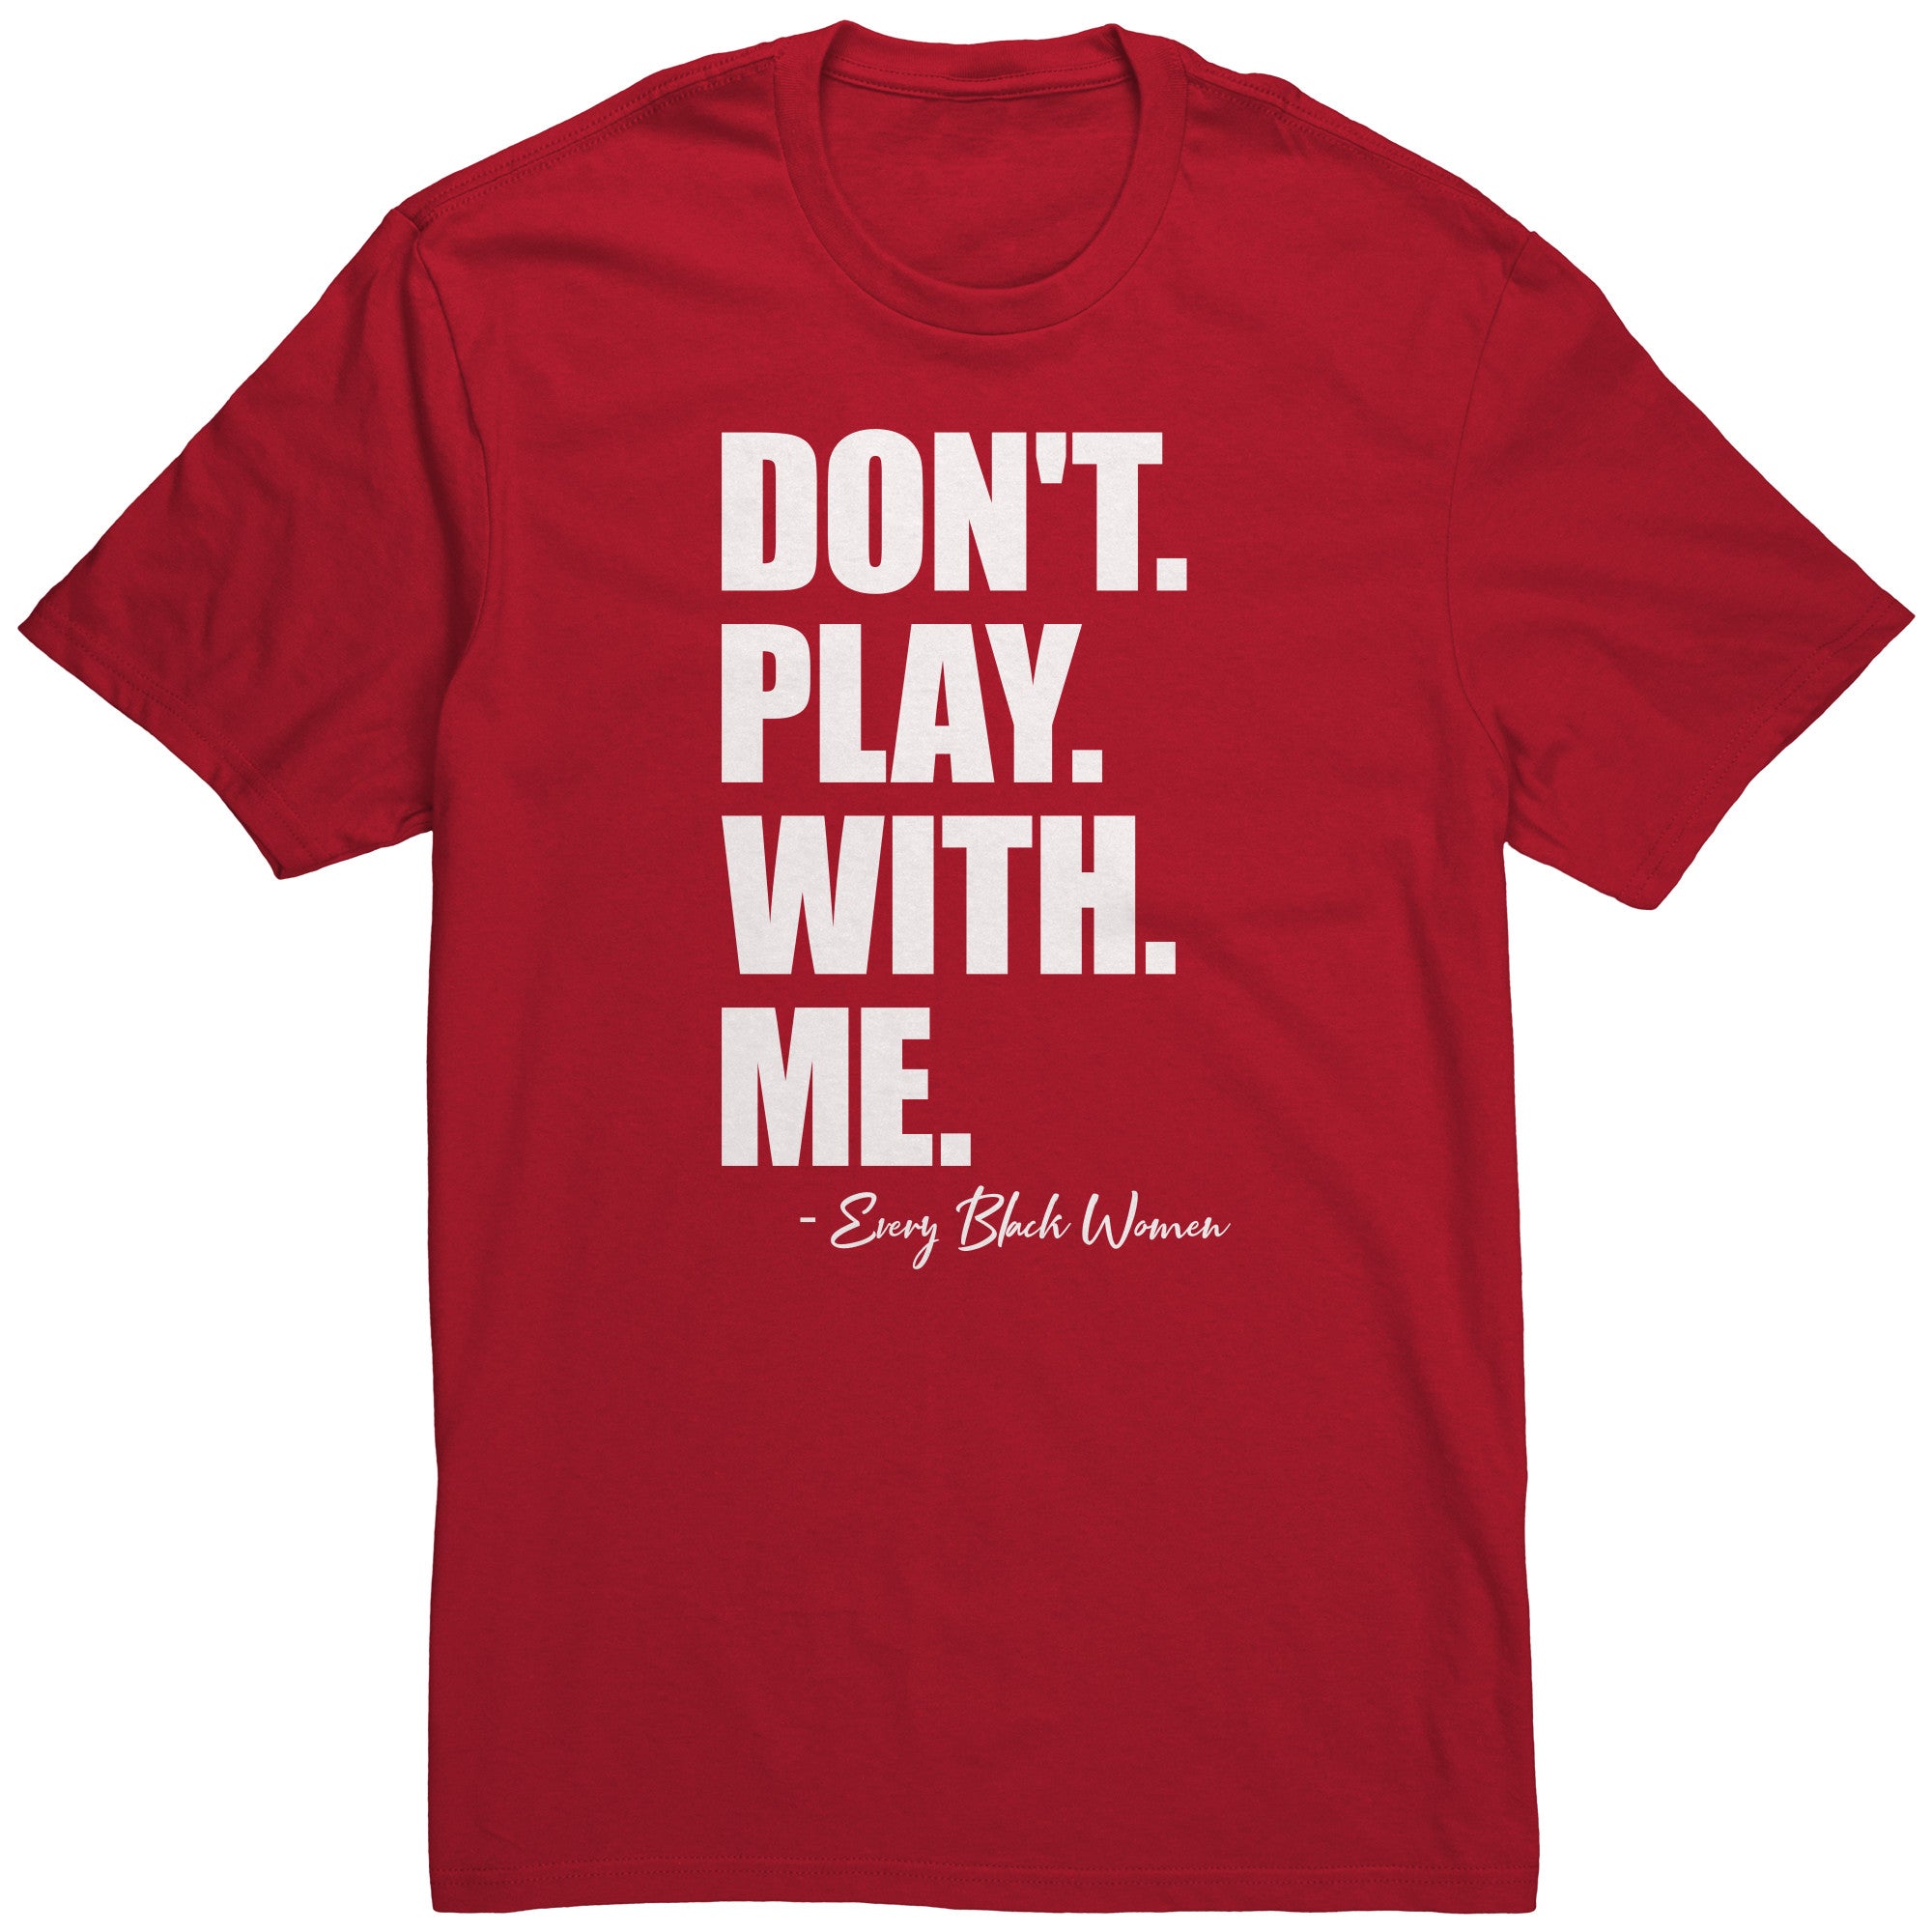 "Don't. Play. With. Me." T-Shirt Red and White